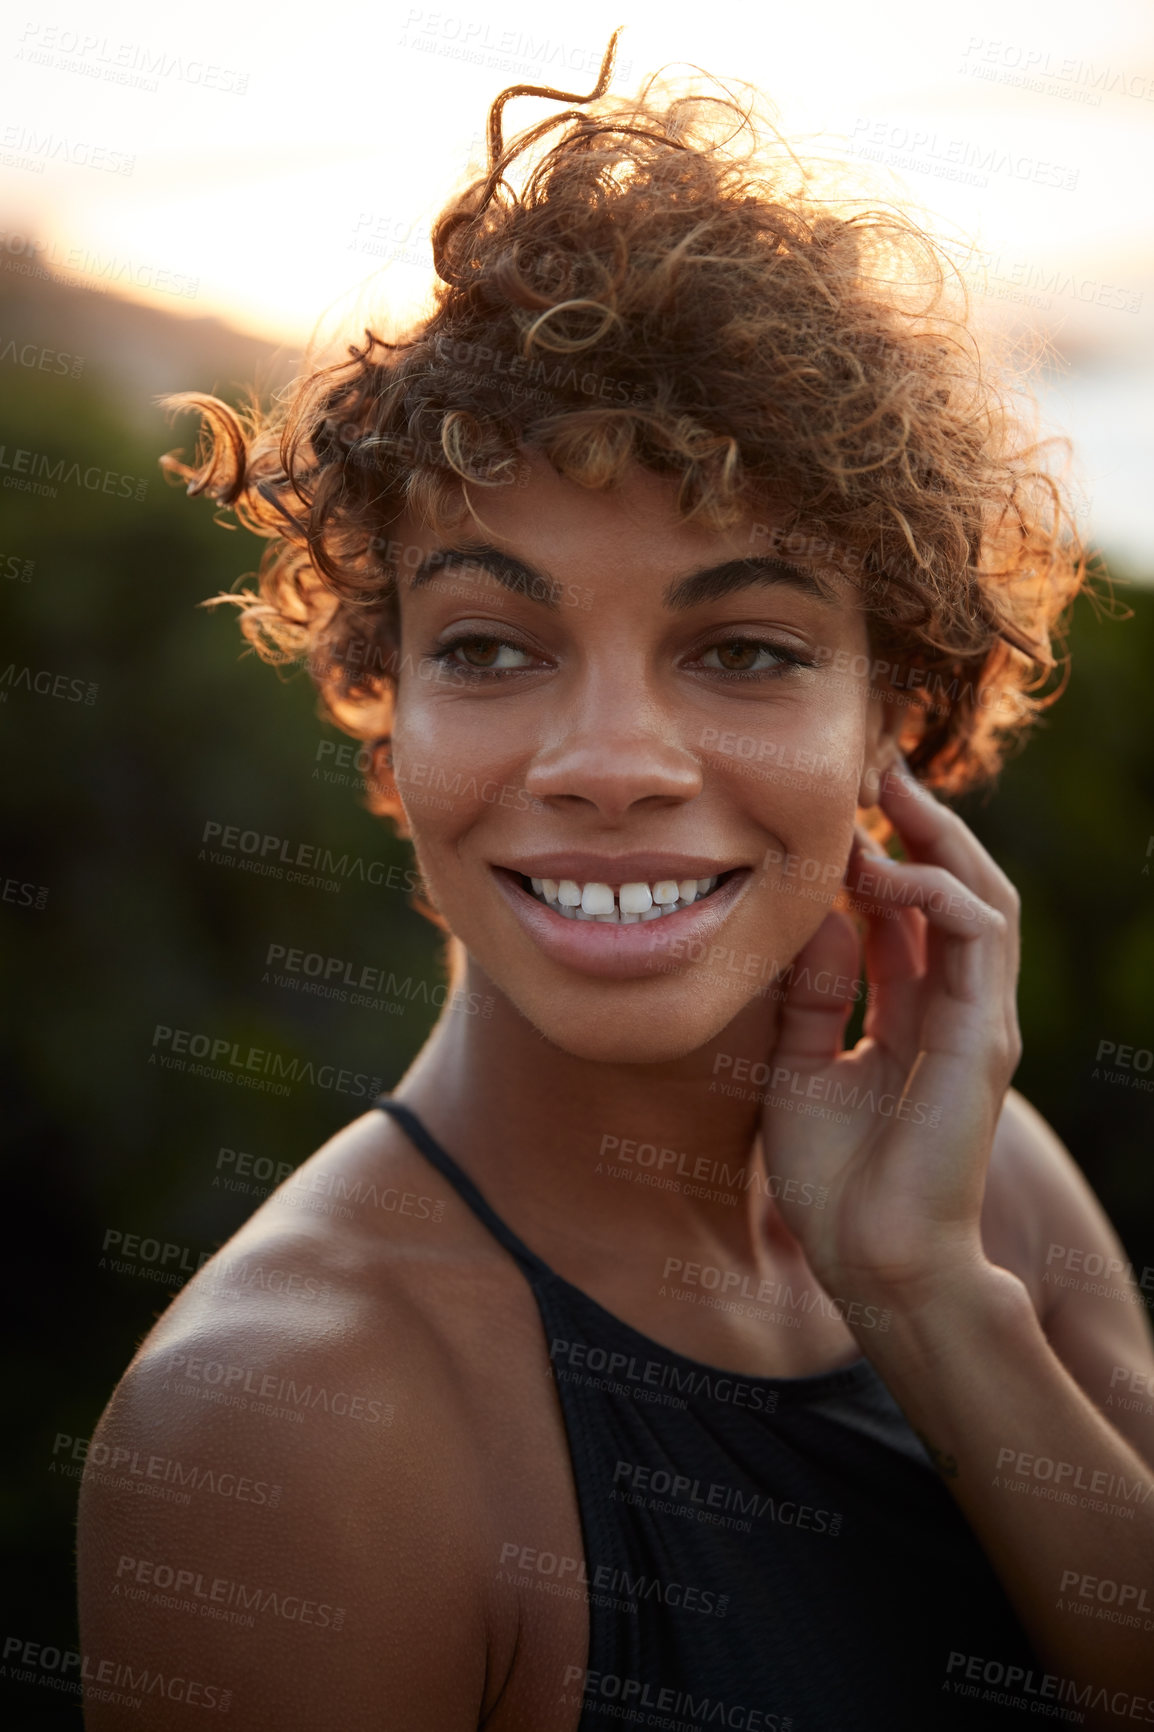 Buy stock photo Portrait of a beautiful young woman spending the day outdoors on a sunny day